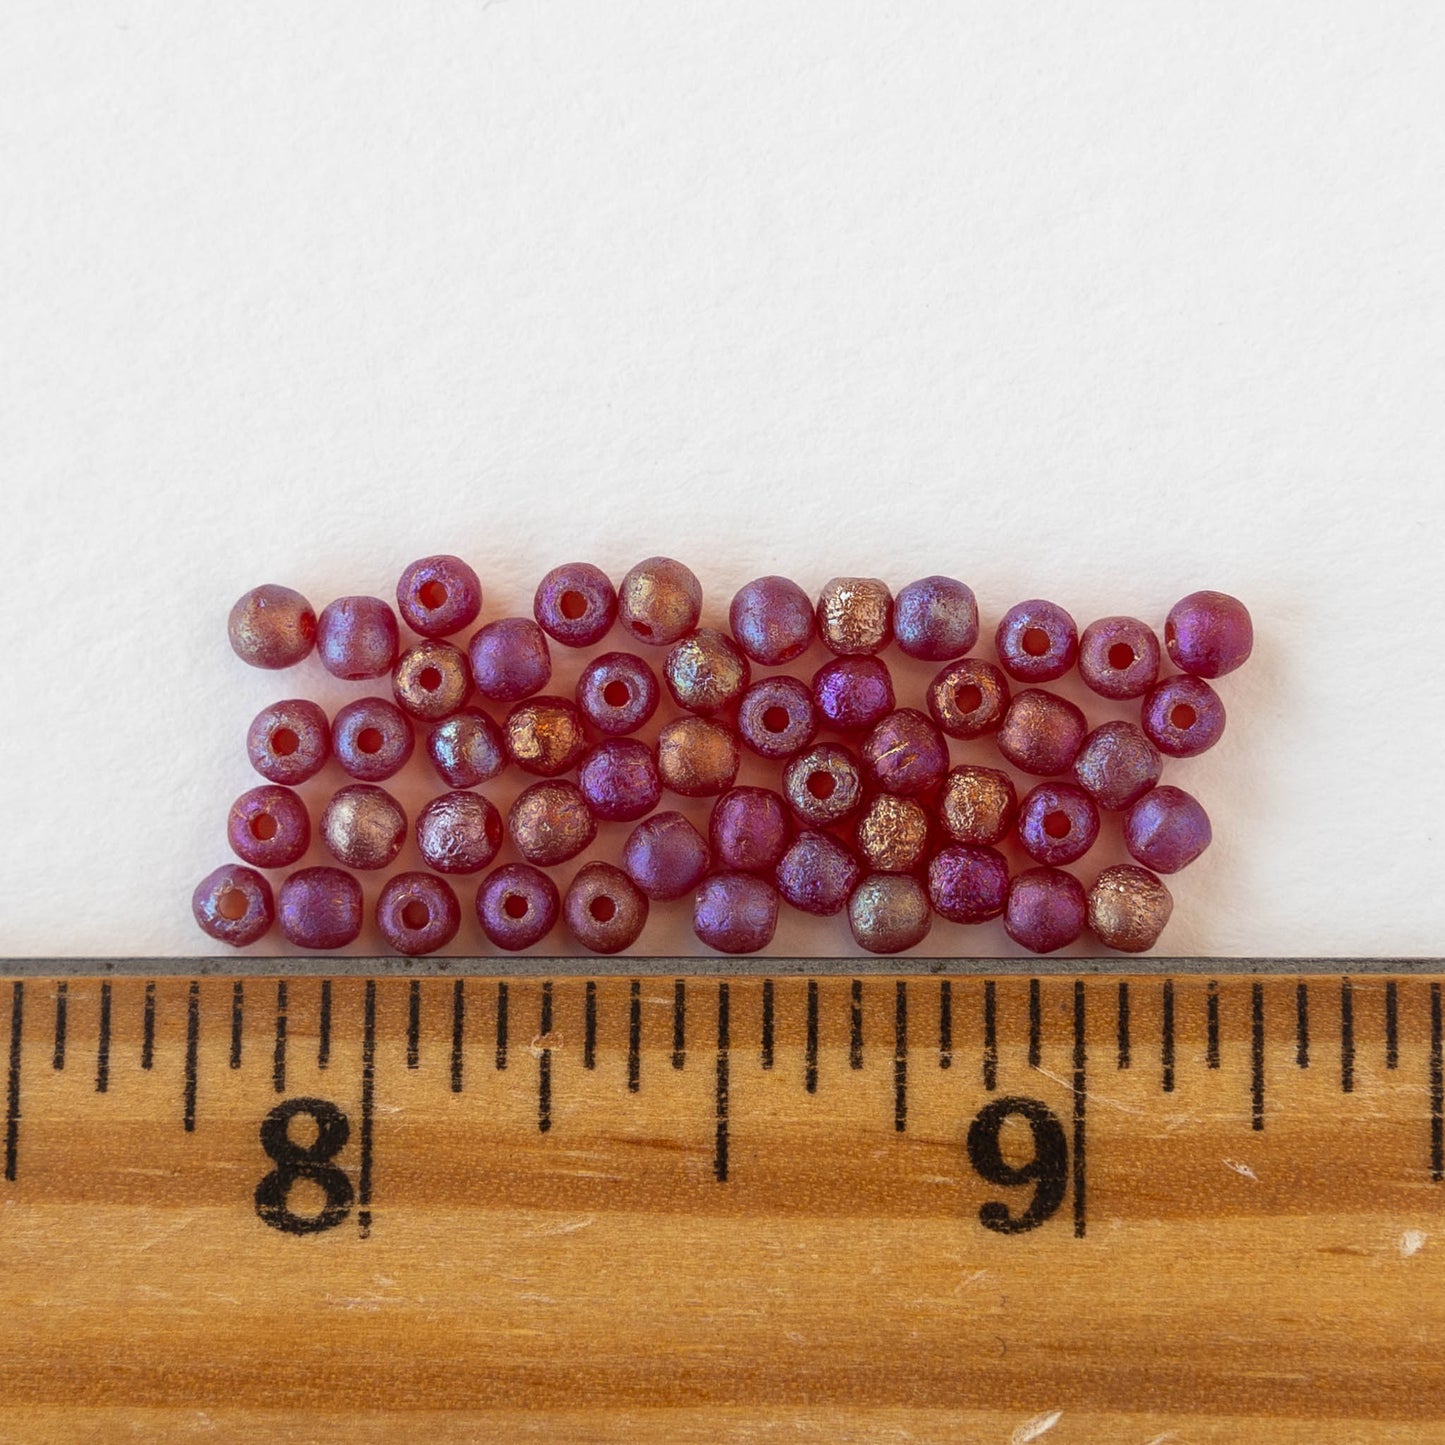 3mm Round Glass Beads - Etched Pink AB - 50 Beads